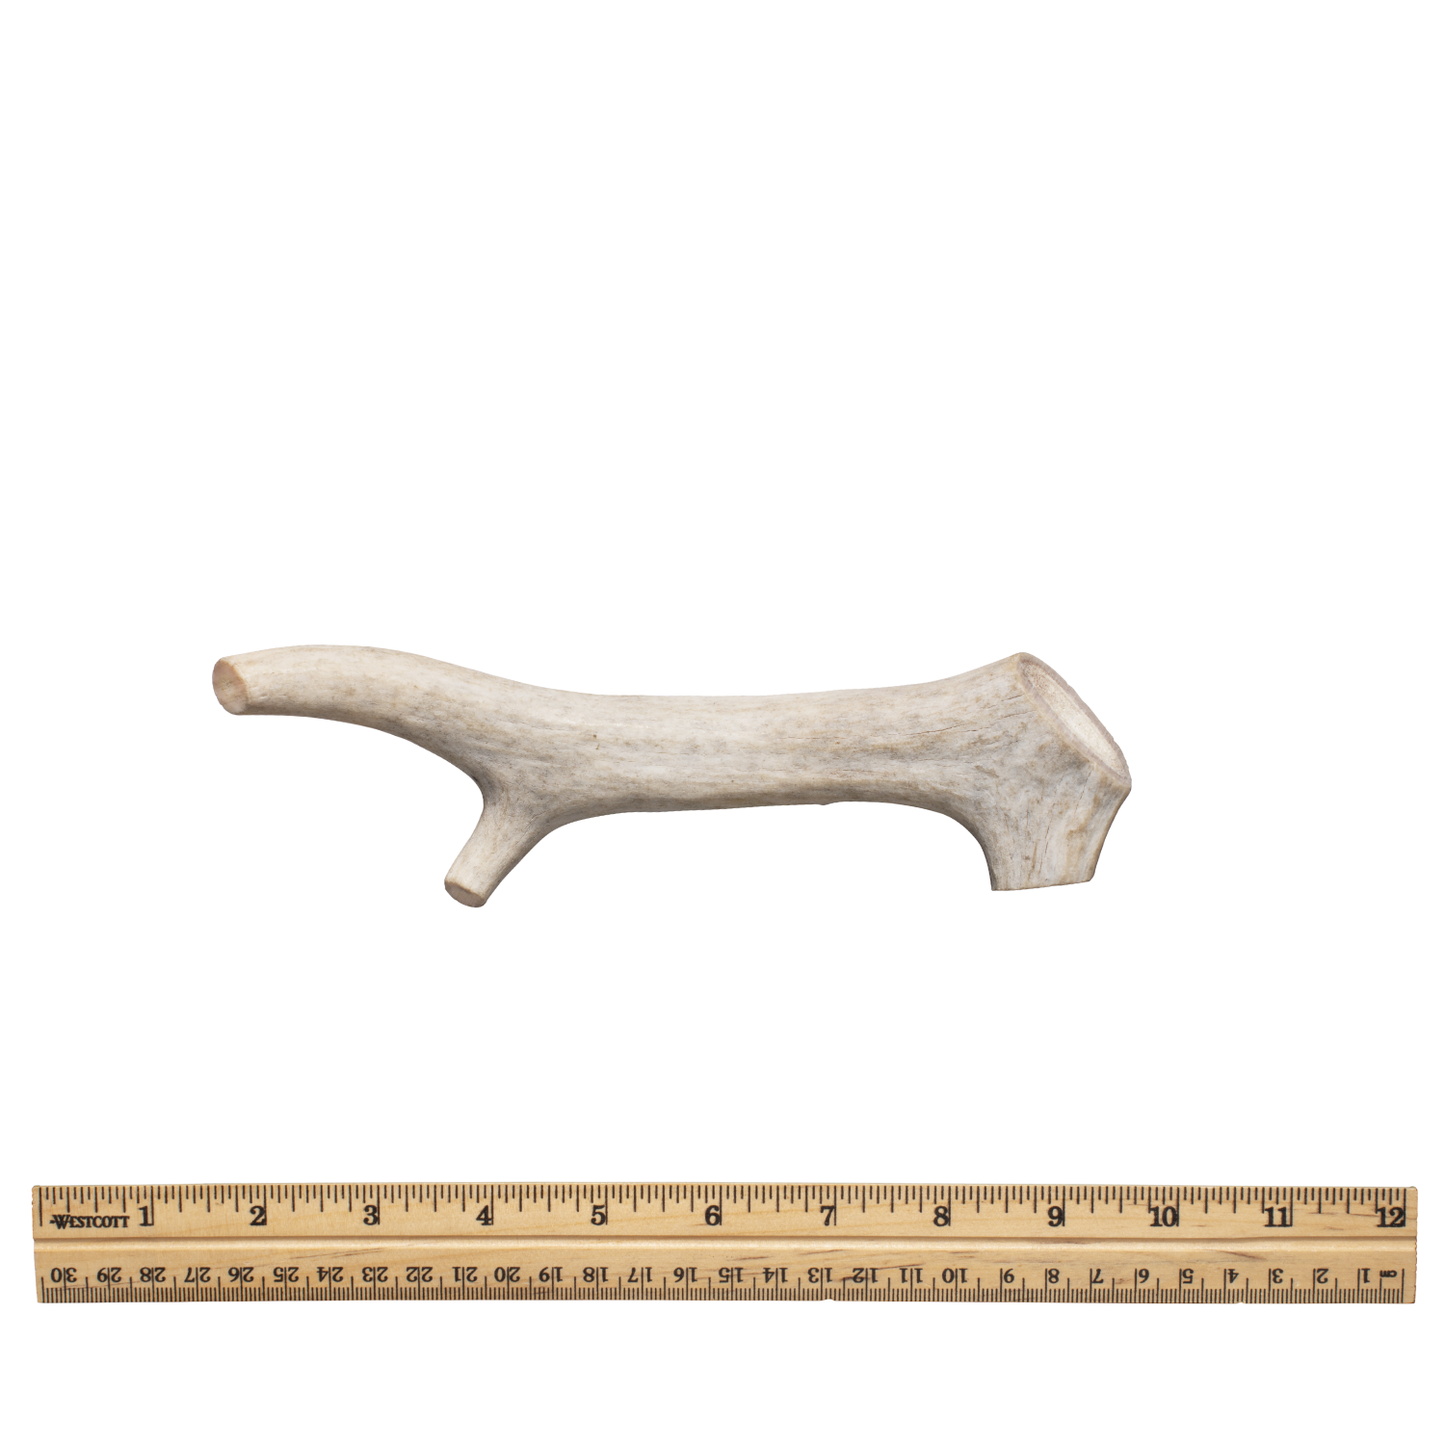 Whole antler lg without tag